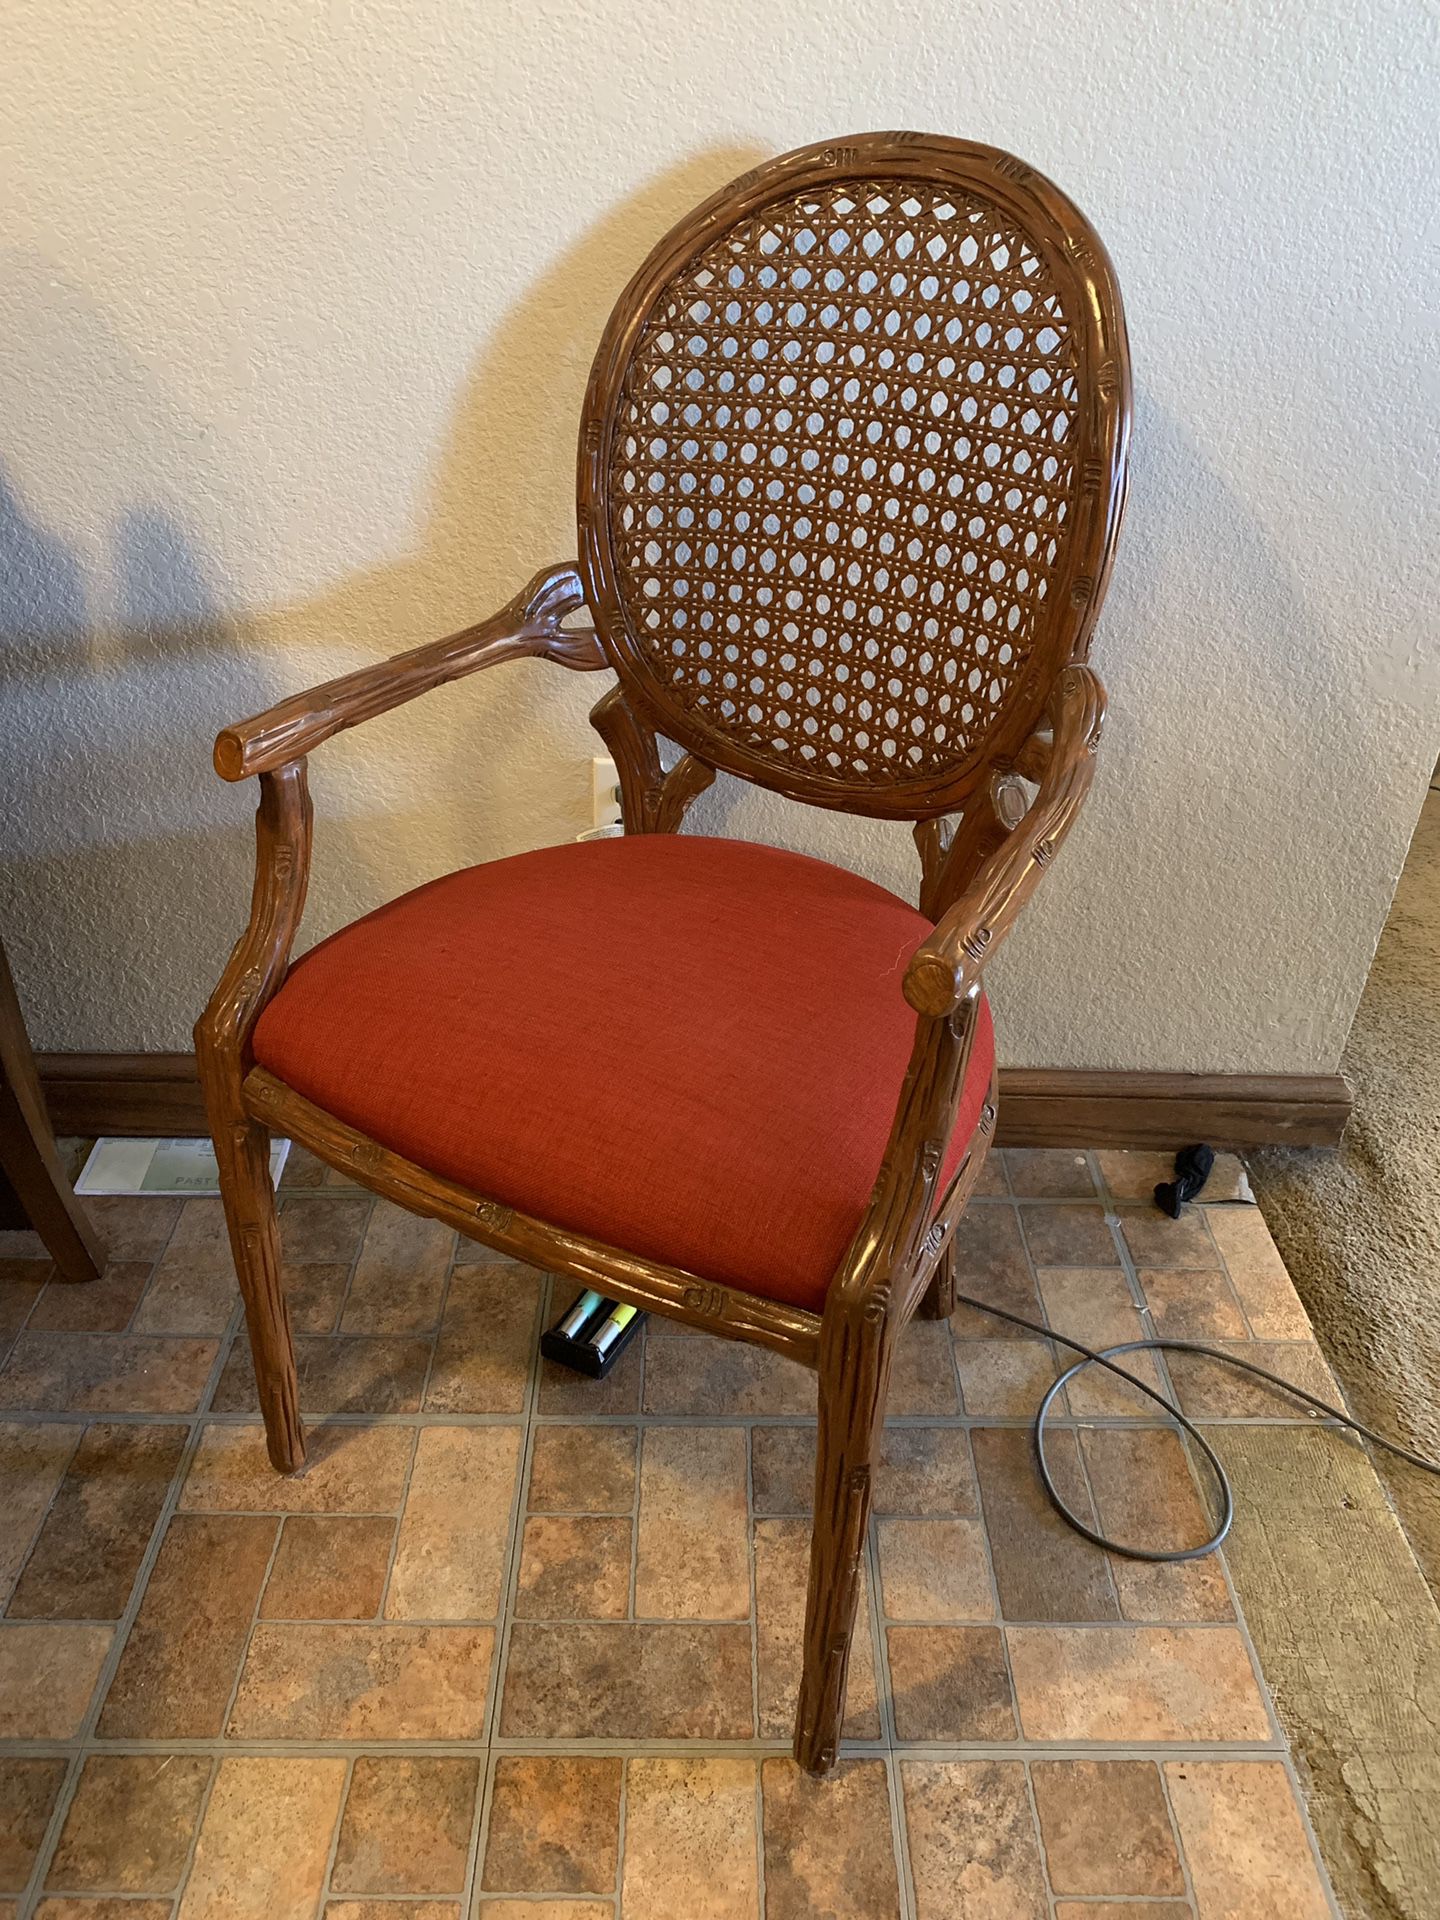 Antique wood chairs (set of 2)